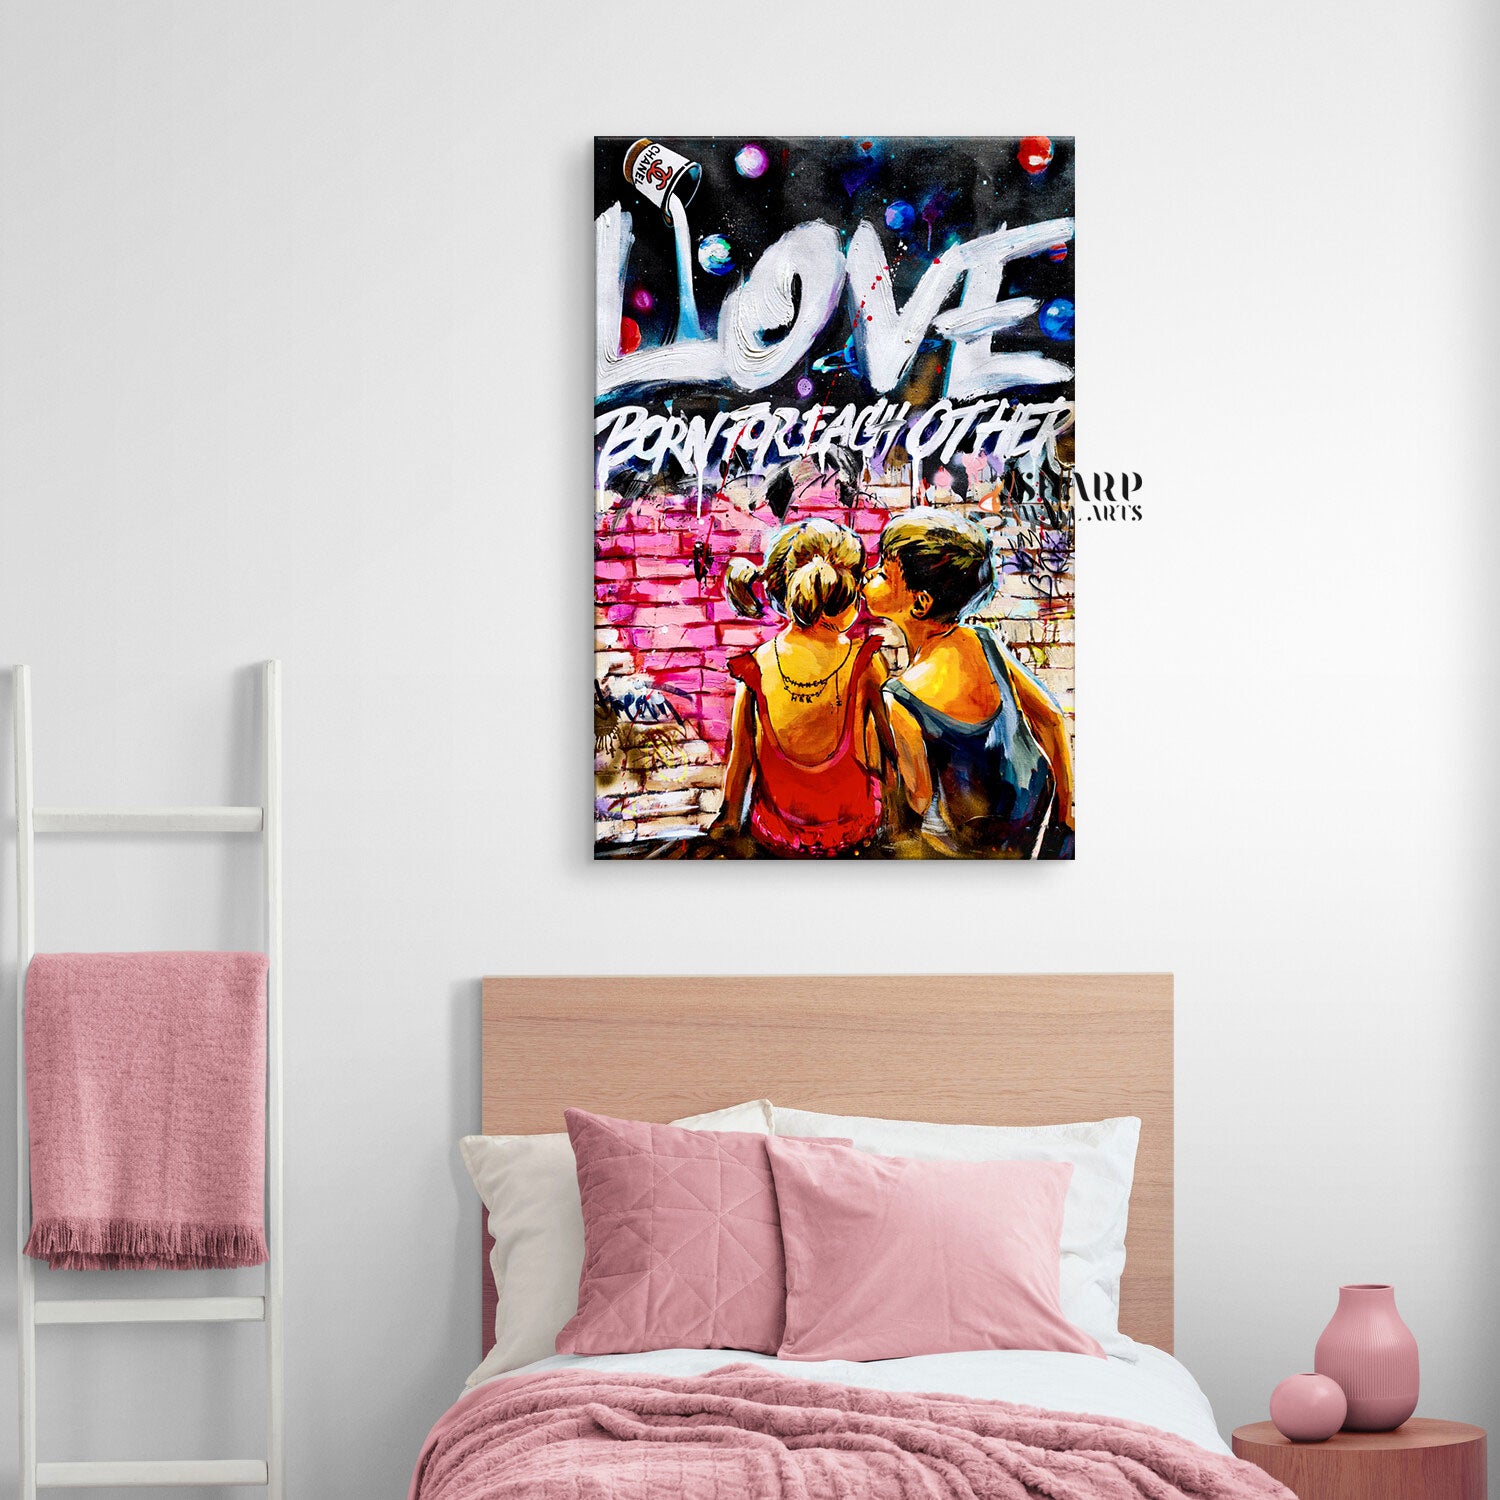 Born For Each Other Canvas Wall Art